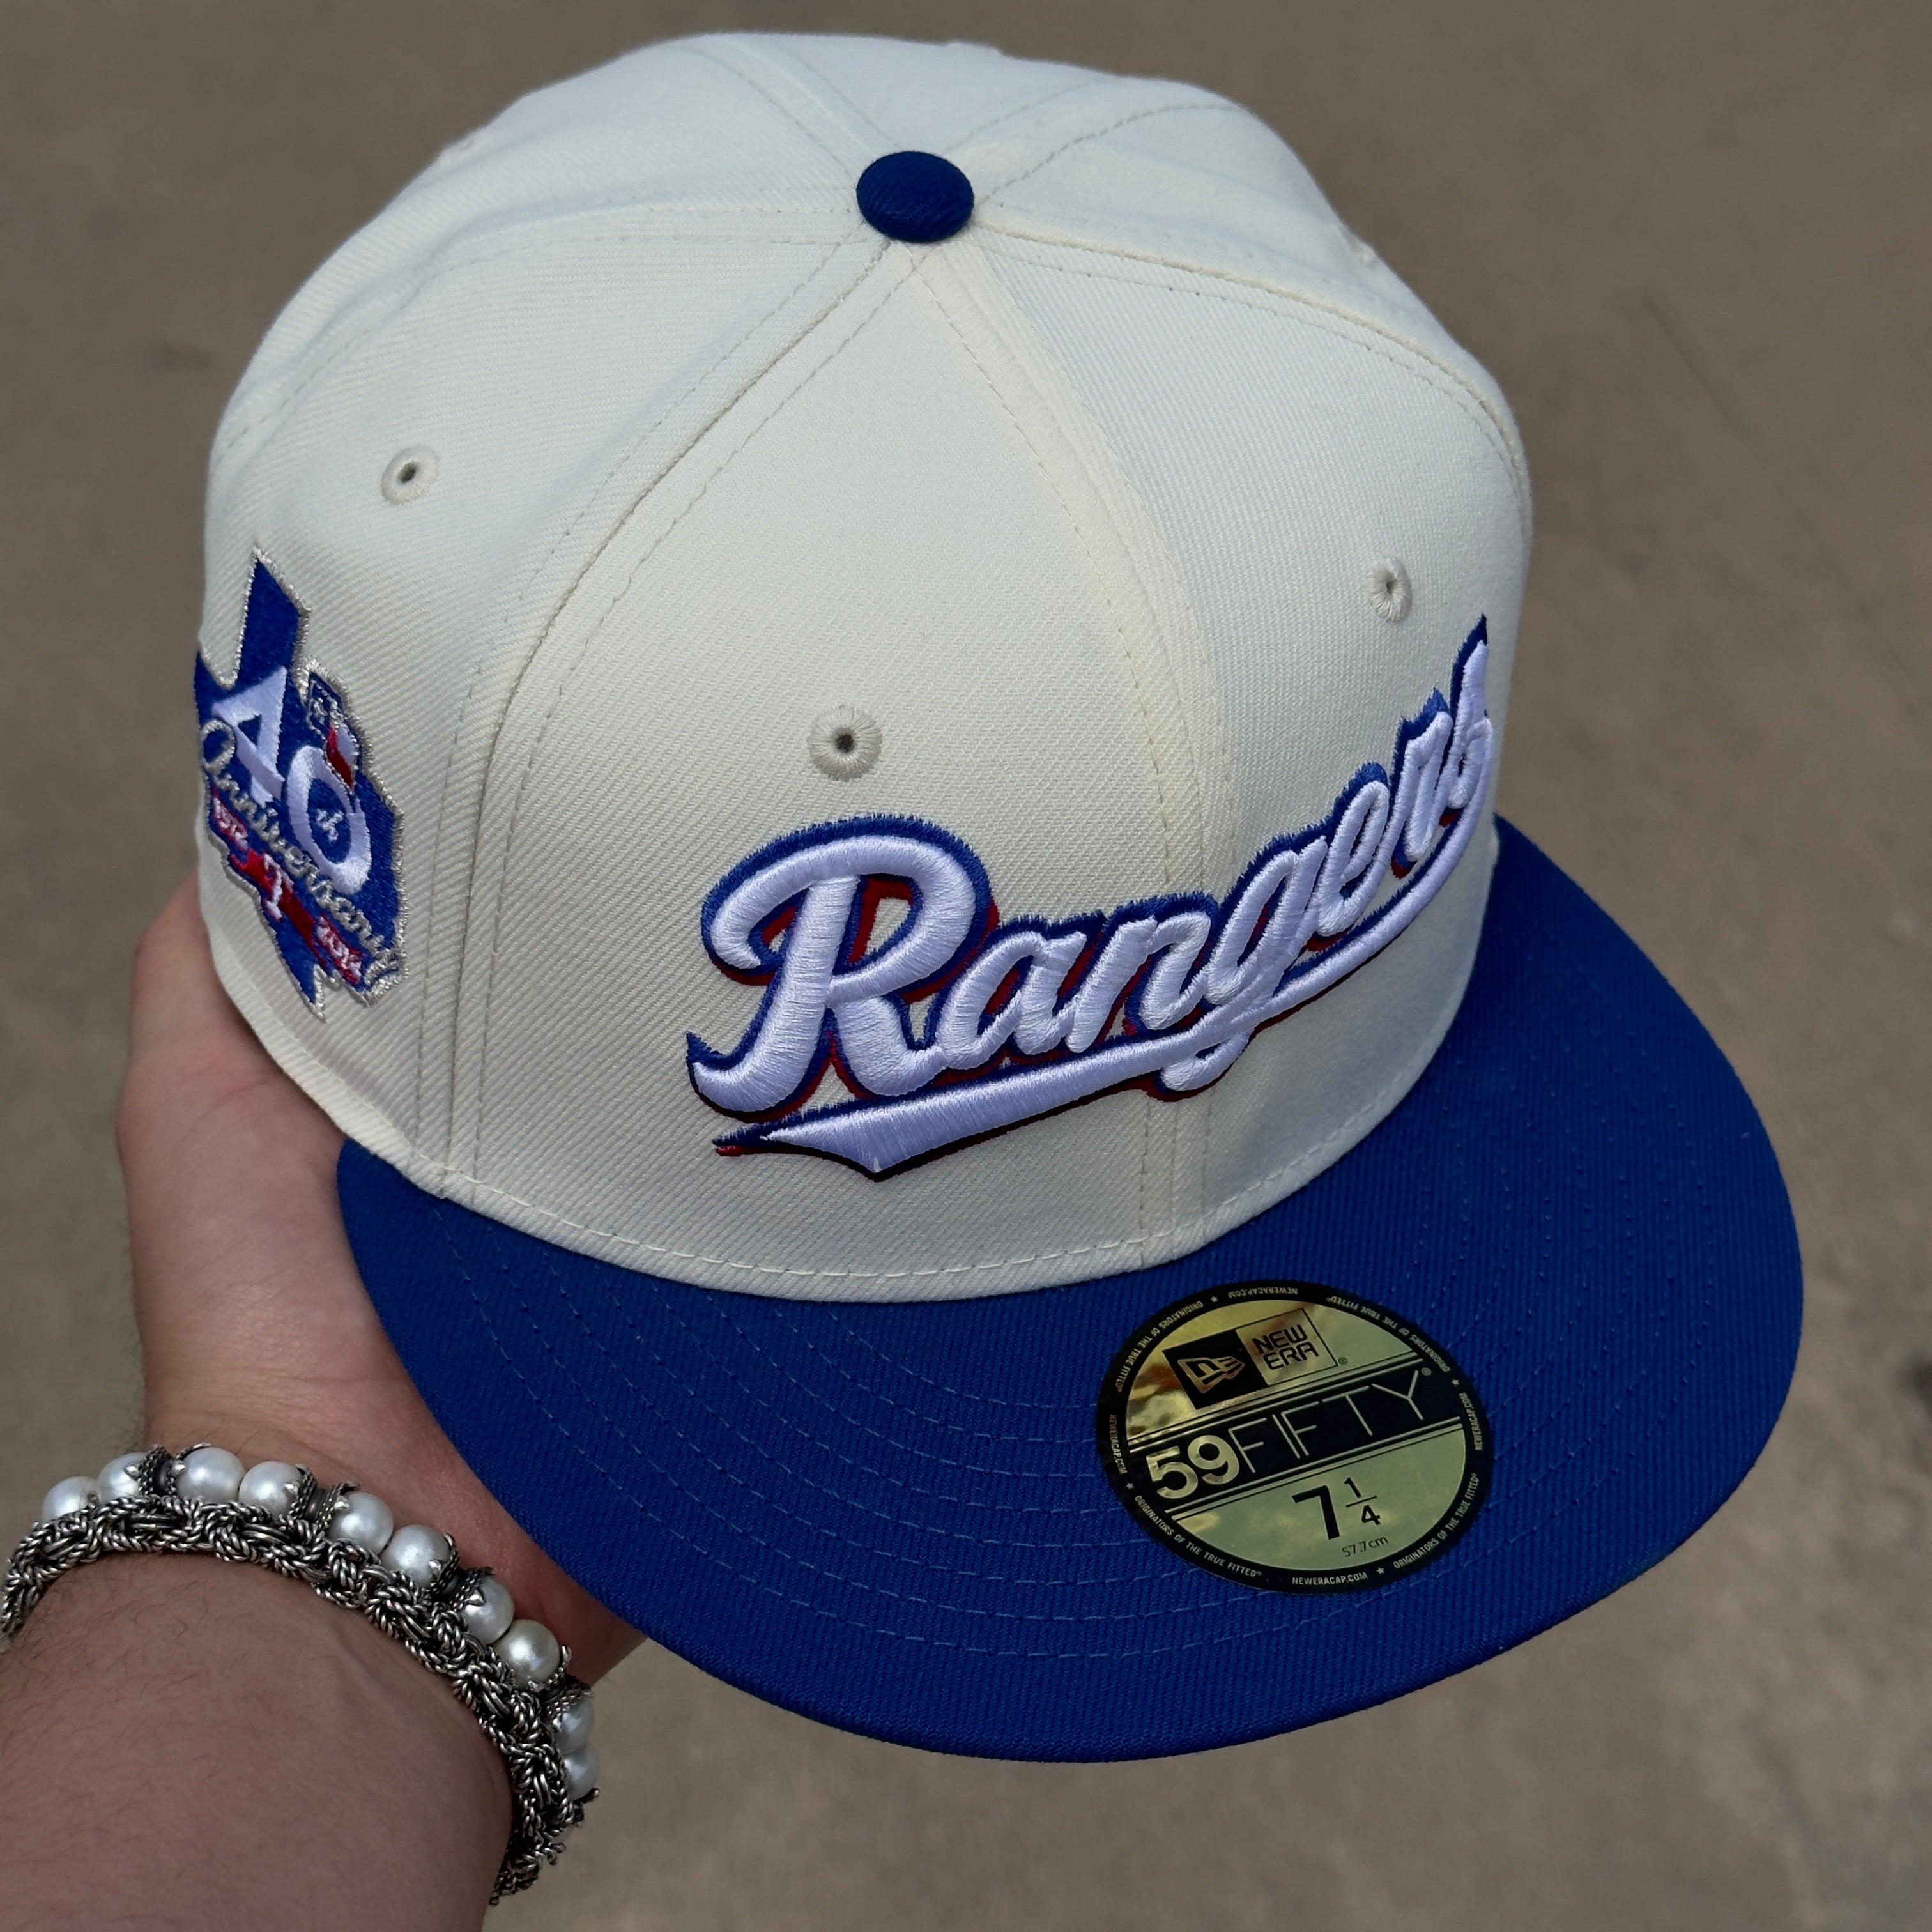 NEW Chrome Dallas Texas Rangers 40th Anniversary Blue 59fifty New Era Fitted Hat Cap